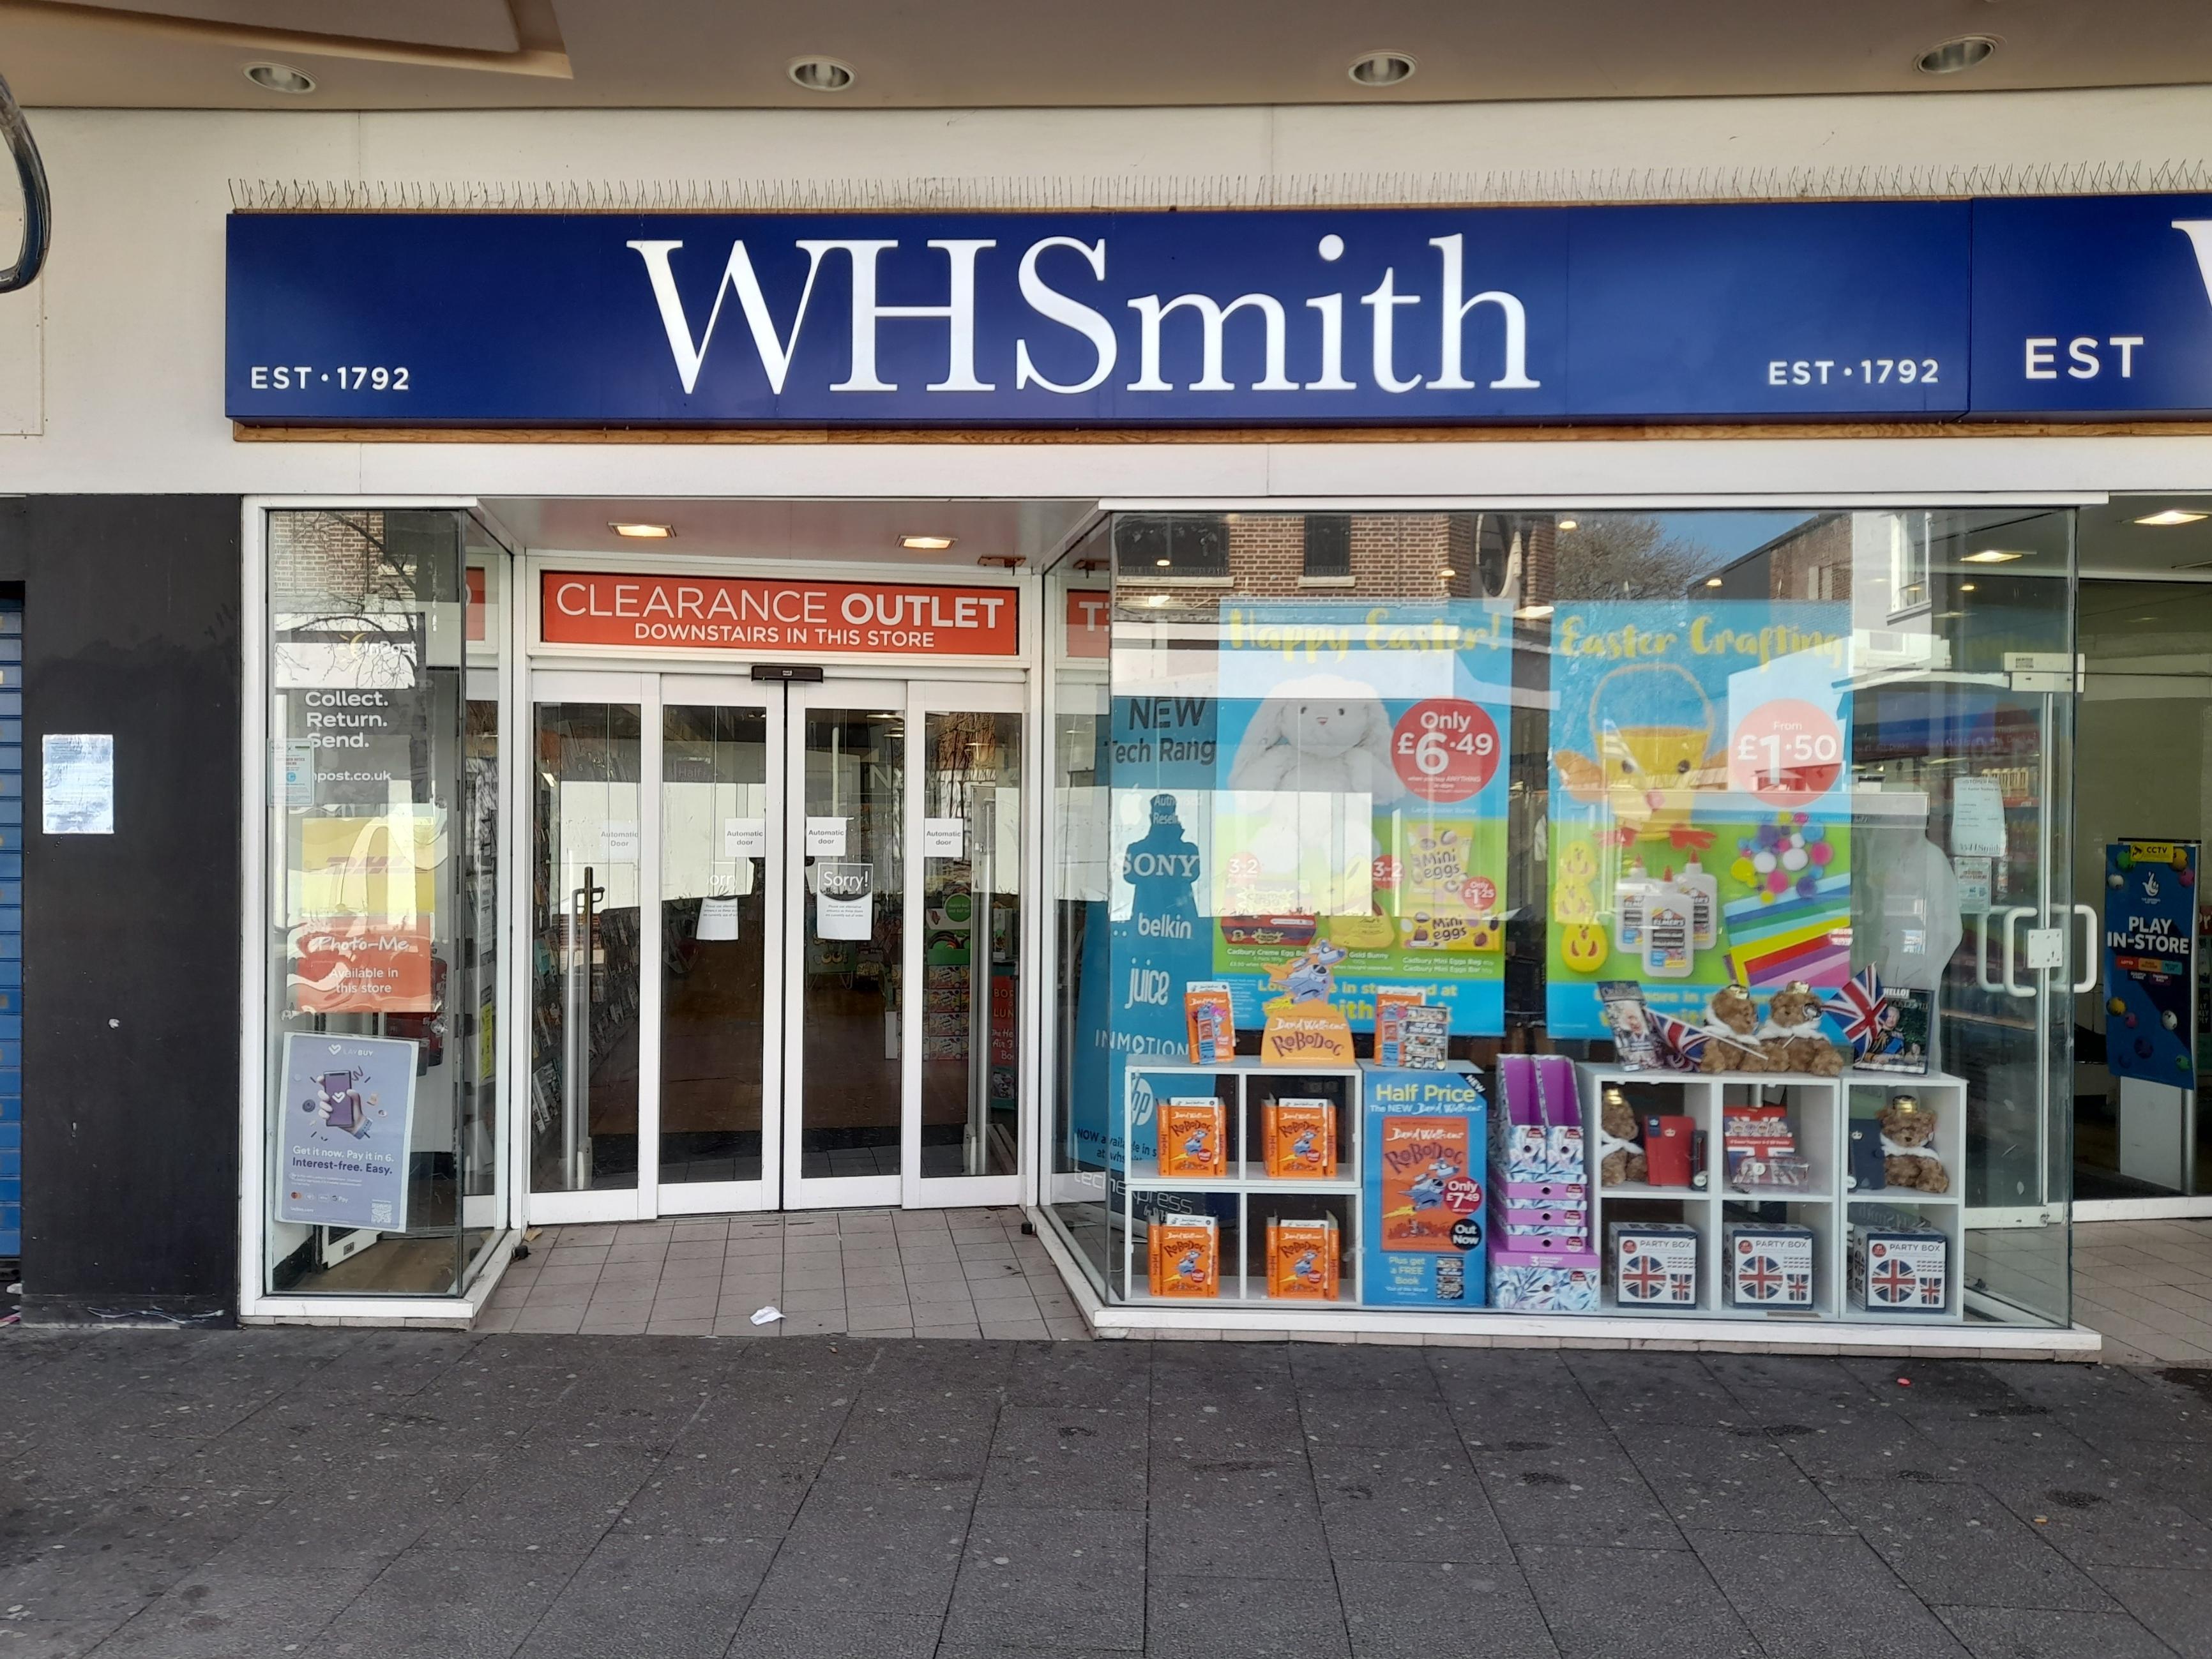 Images DHL Express Service Point (WHSmith Bedford)